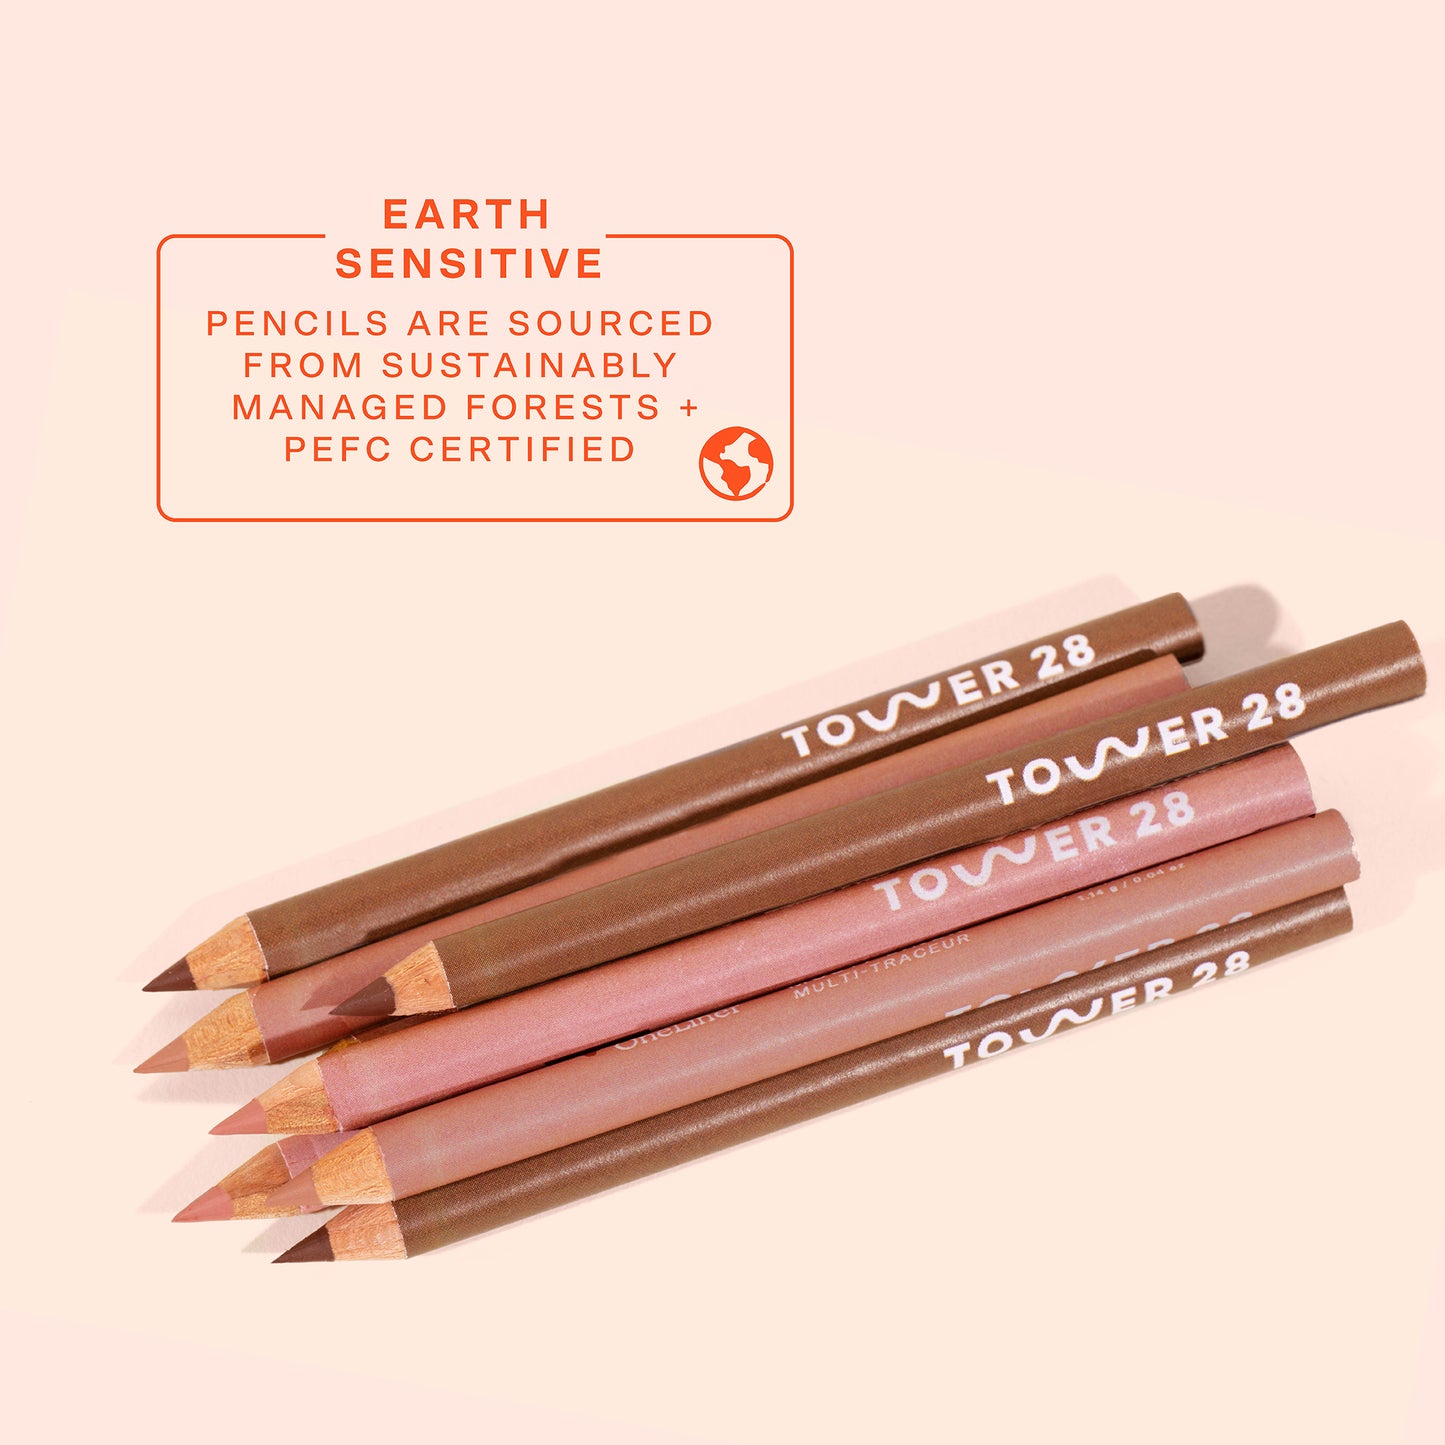 OneLiner [The Tower 28 Beauty OneLiner pencils are sourced from sustainably managed forests and PEFC certified]